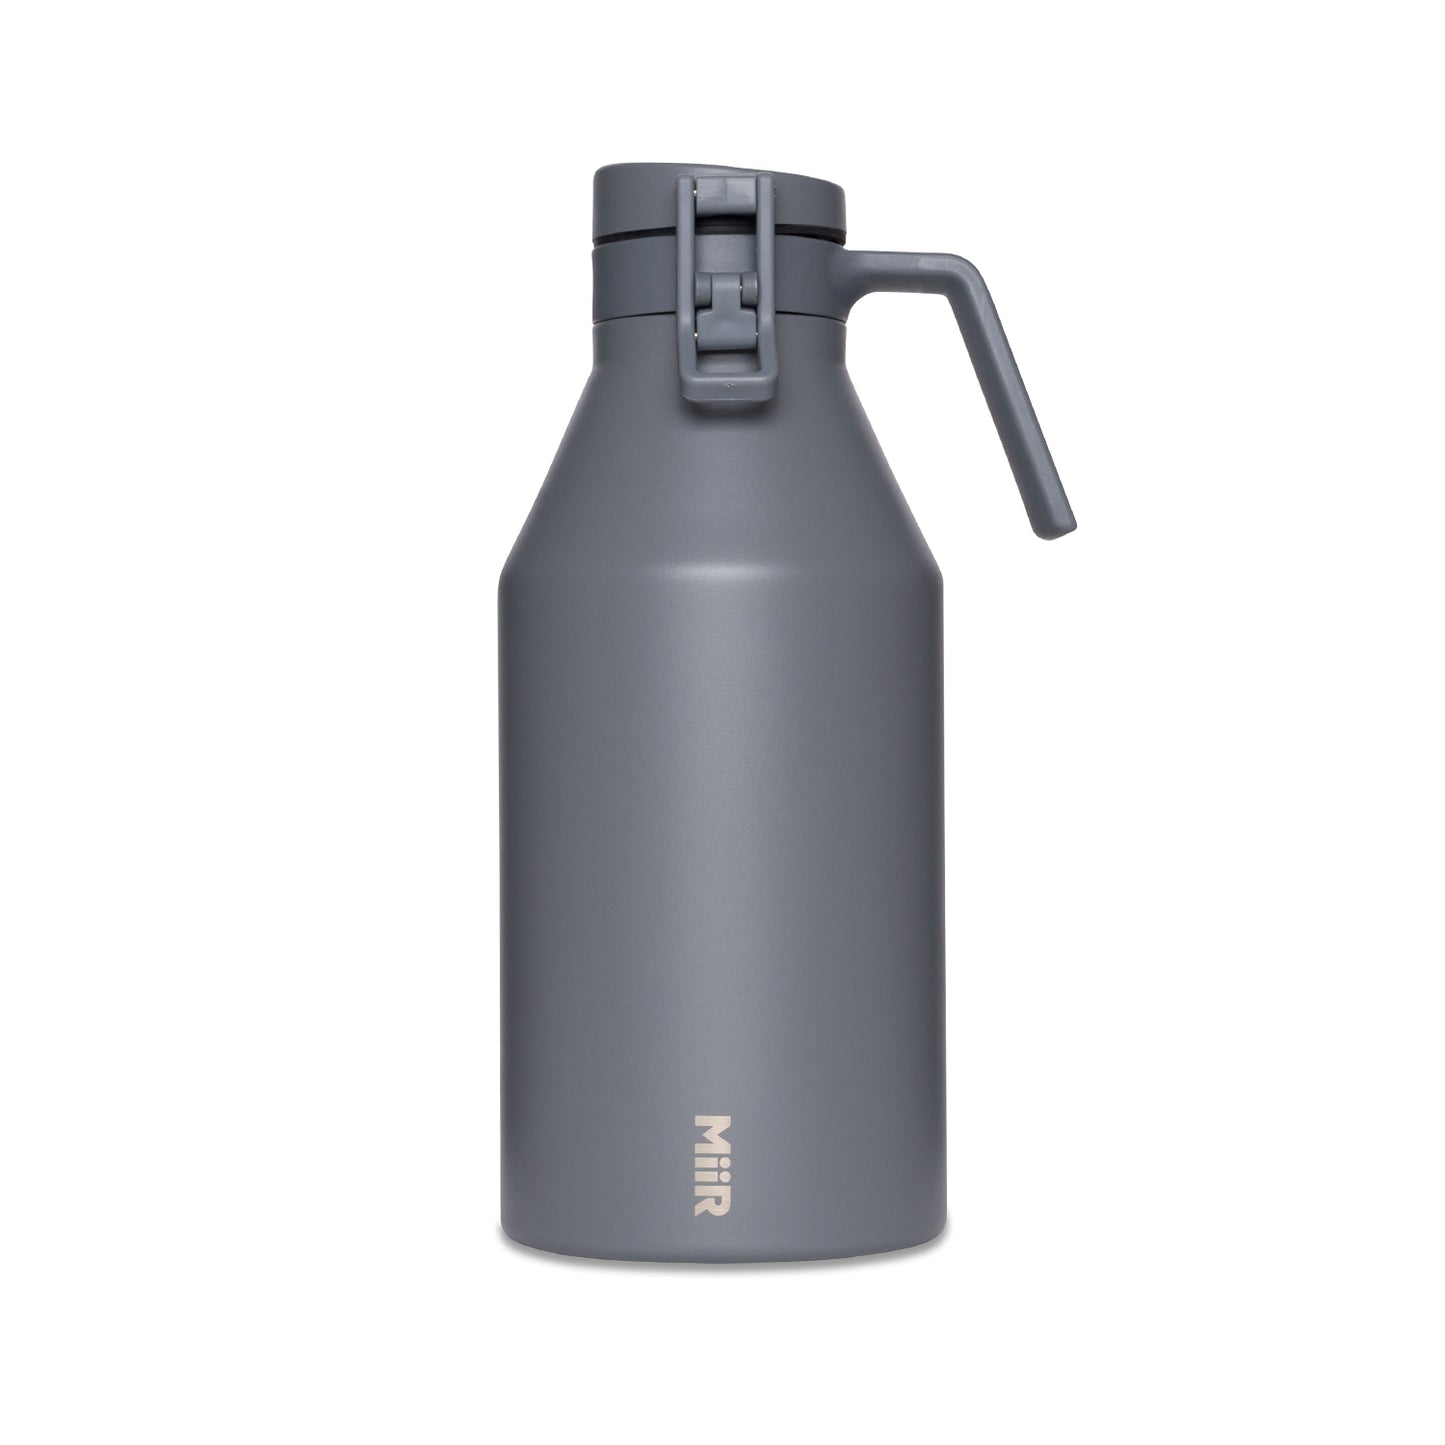 64oz. Stainless Steel Insulated Growler, Black